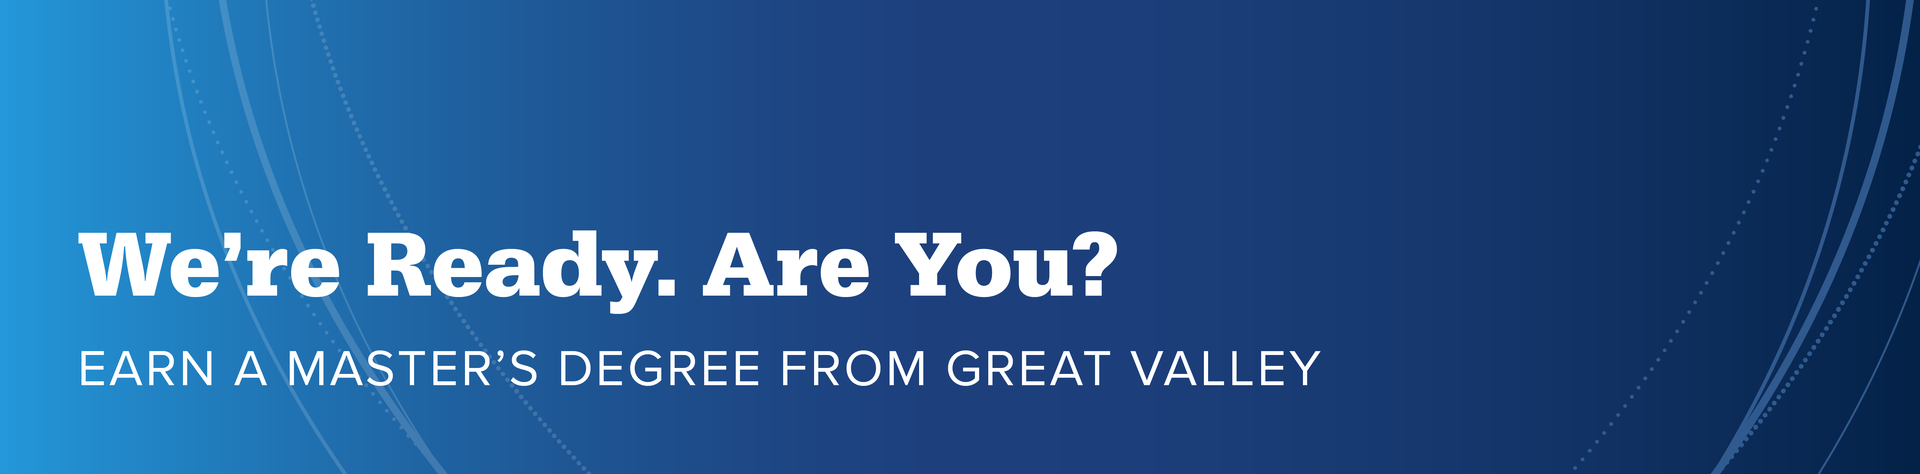 Header with text "We're Ready. Are You? Earn a Master's Degree from Penn State Great Valley